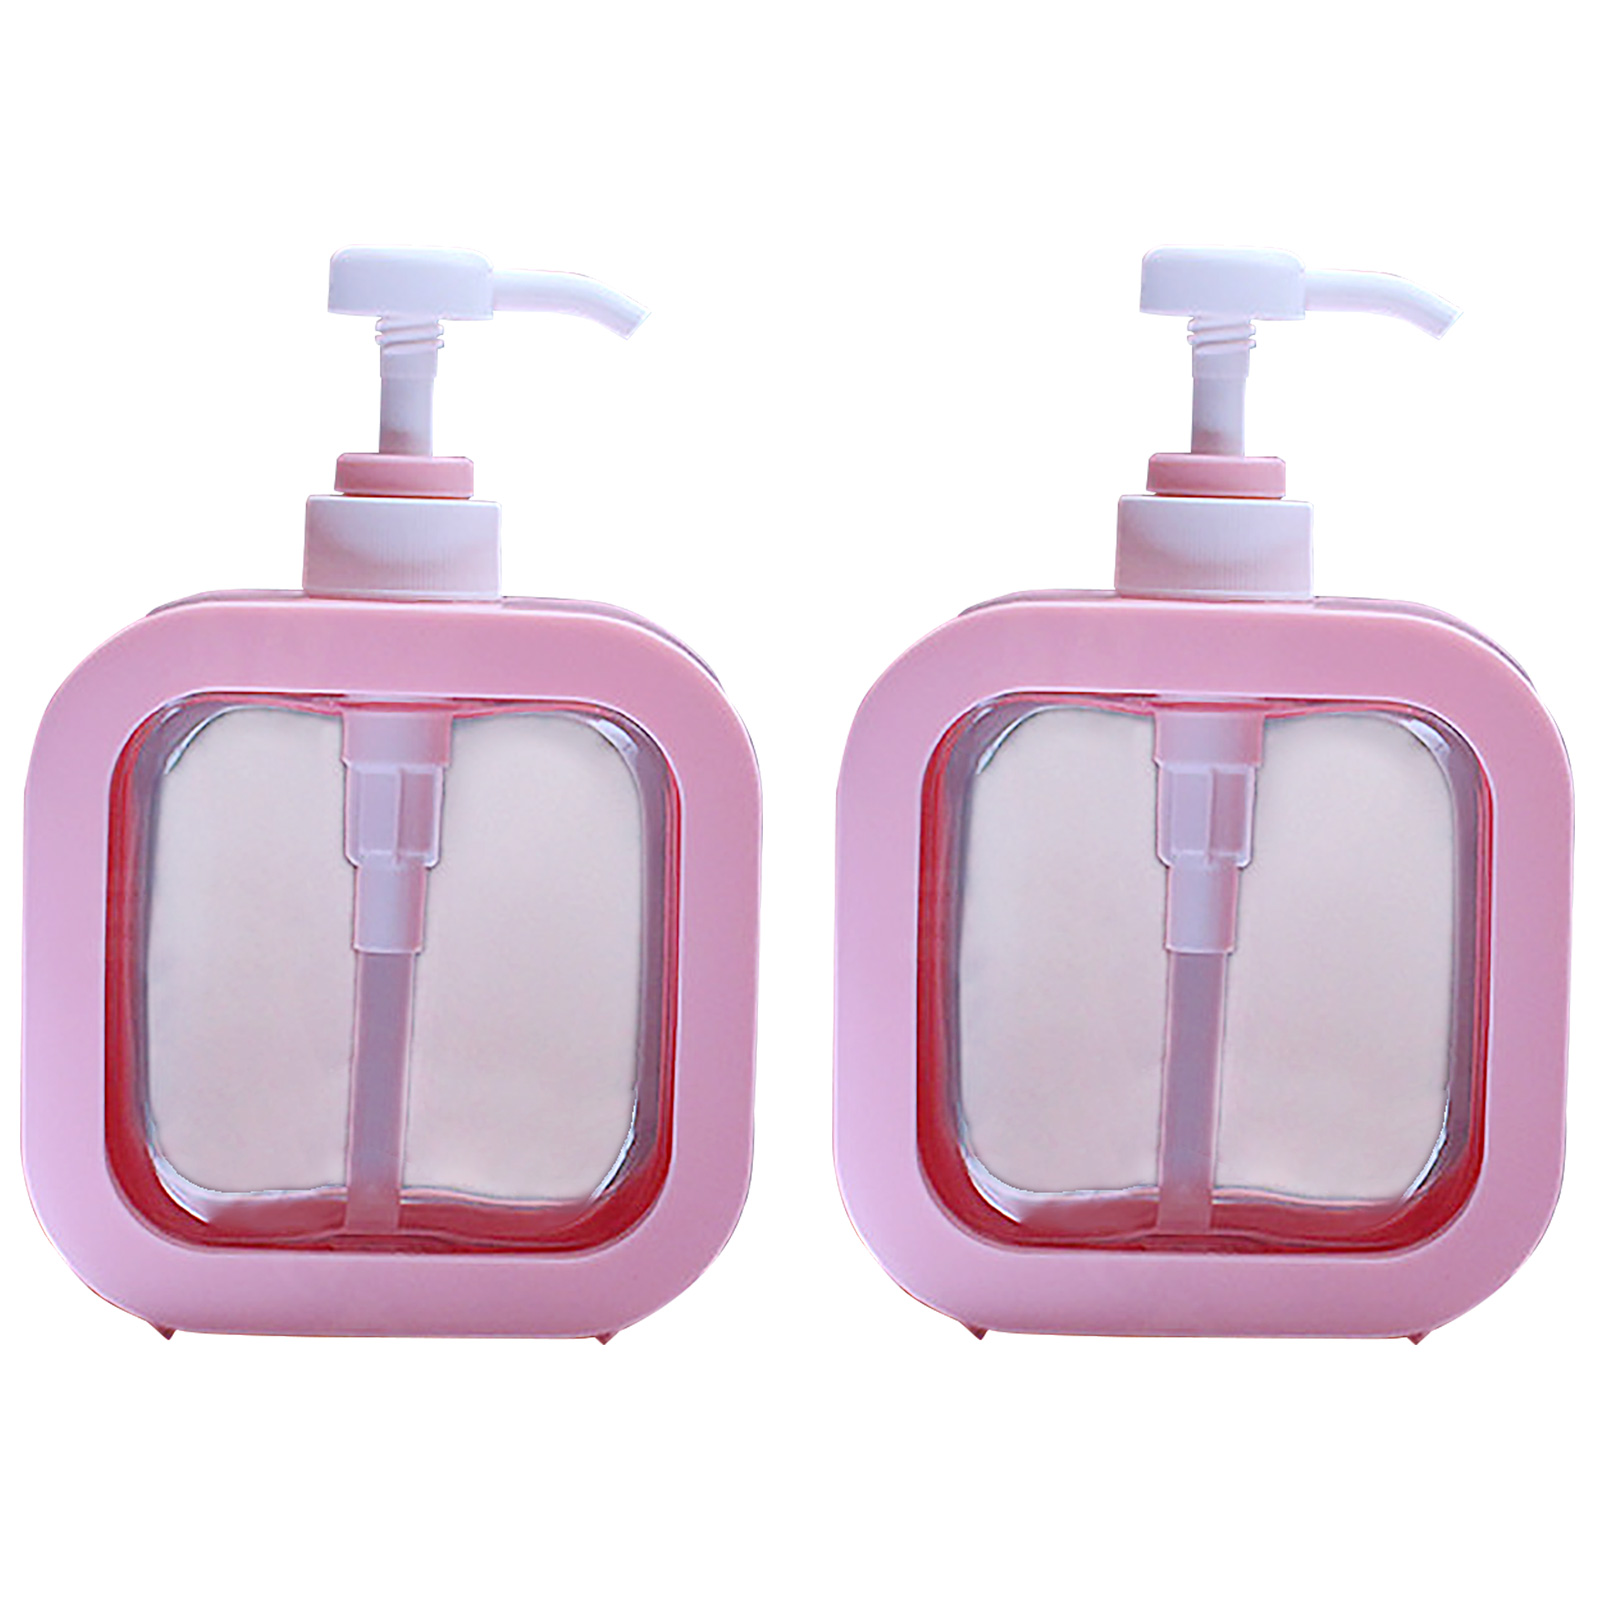 Yuedong Pump Bottle Dispenser Plastic Pump Bottles Refillable Bottles Wide Mouth Jar Style ,Empty Pump Bottles Kitchen Bathroom Shower Containers for Lotion Shampoo Conditioner -2 Pack ,300ML - image 1 of 12